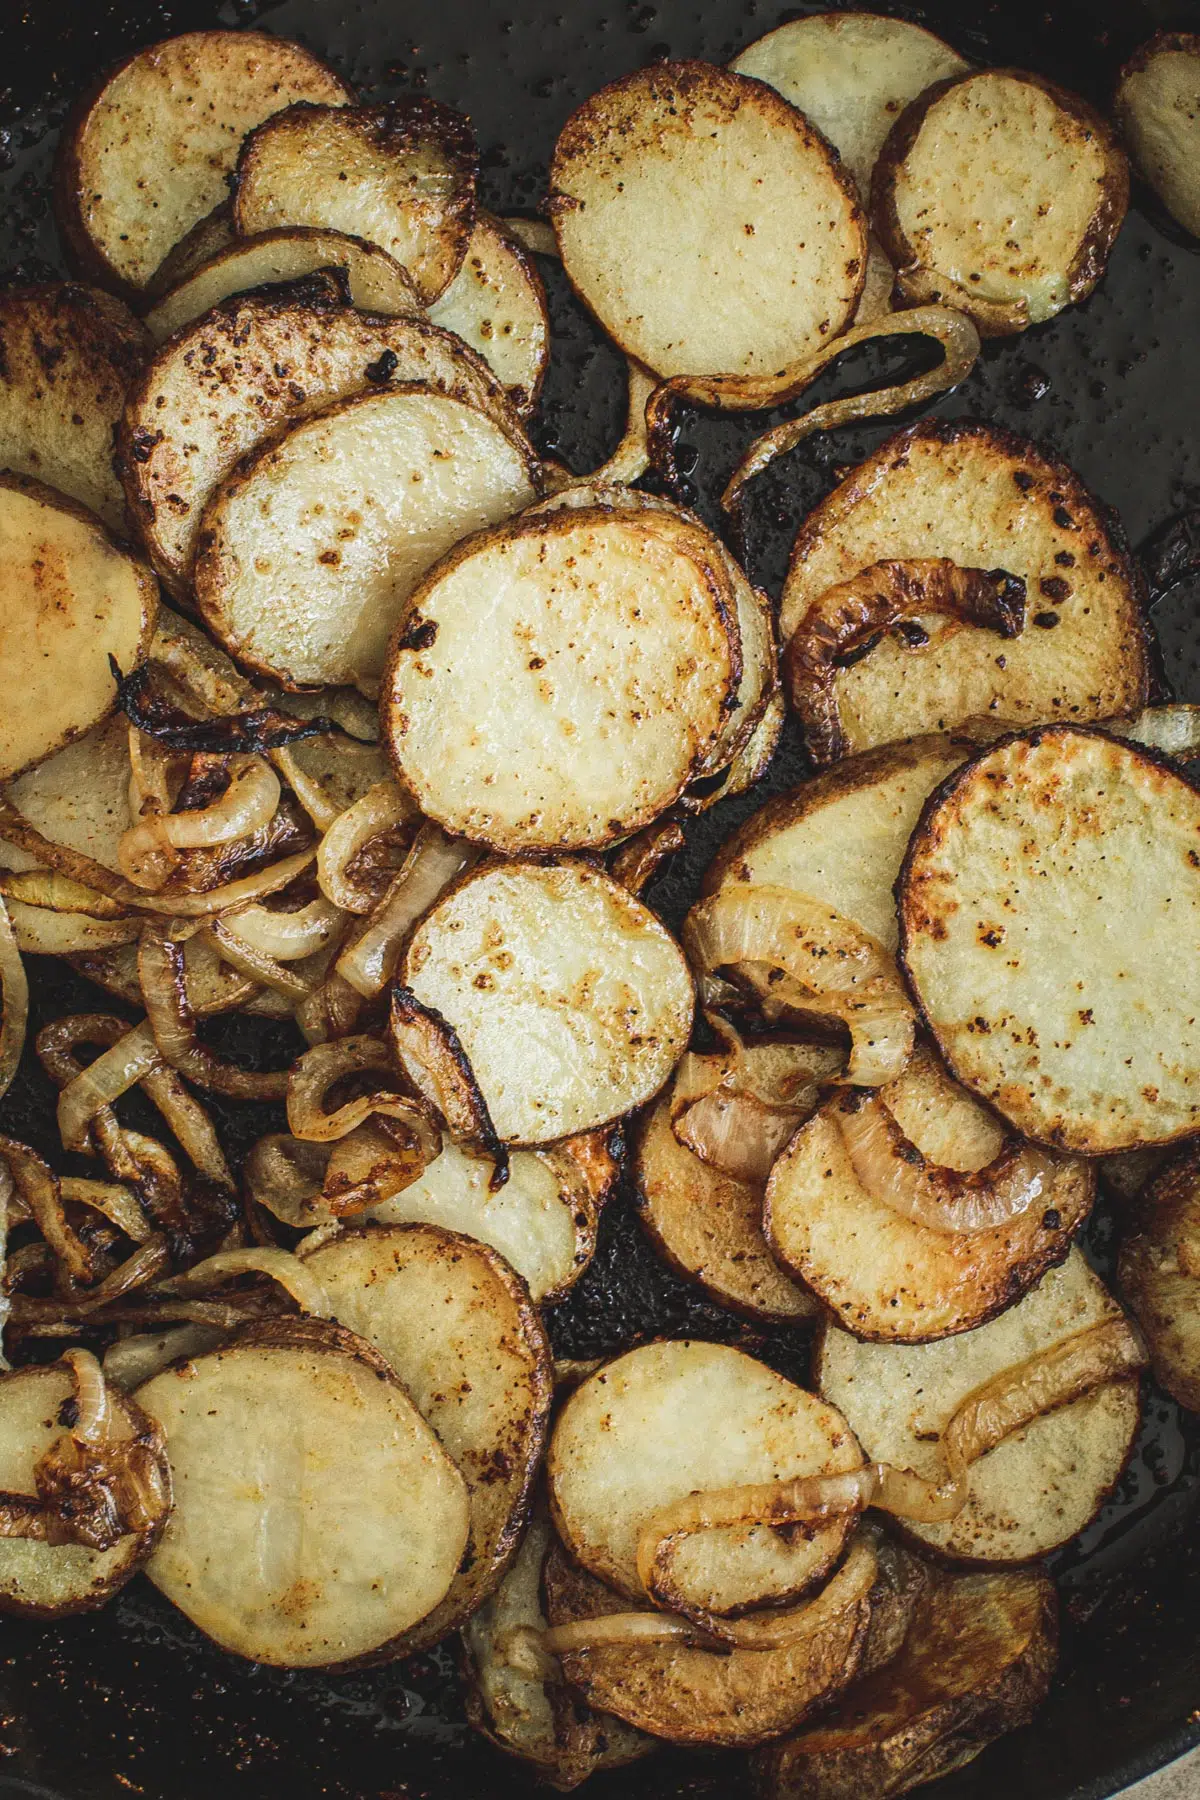 Fried potatoes and onions in an iron skillet.